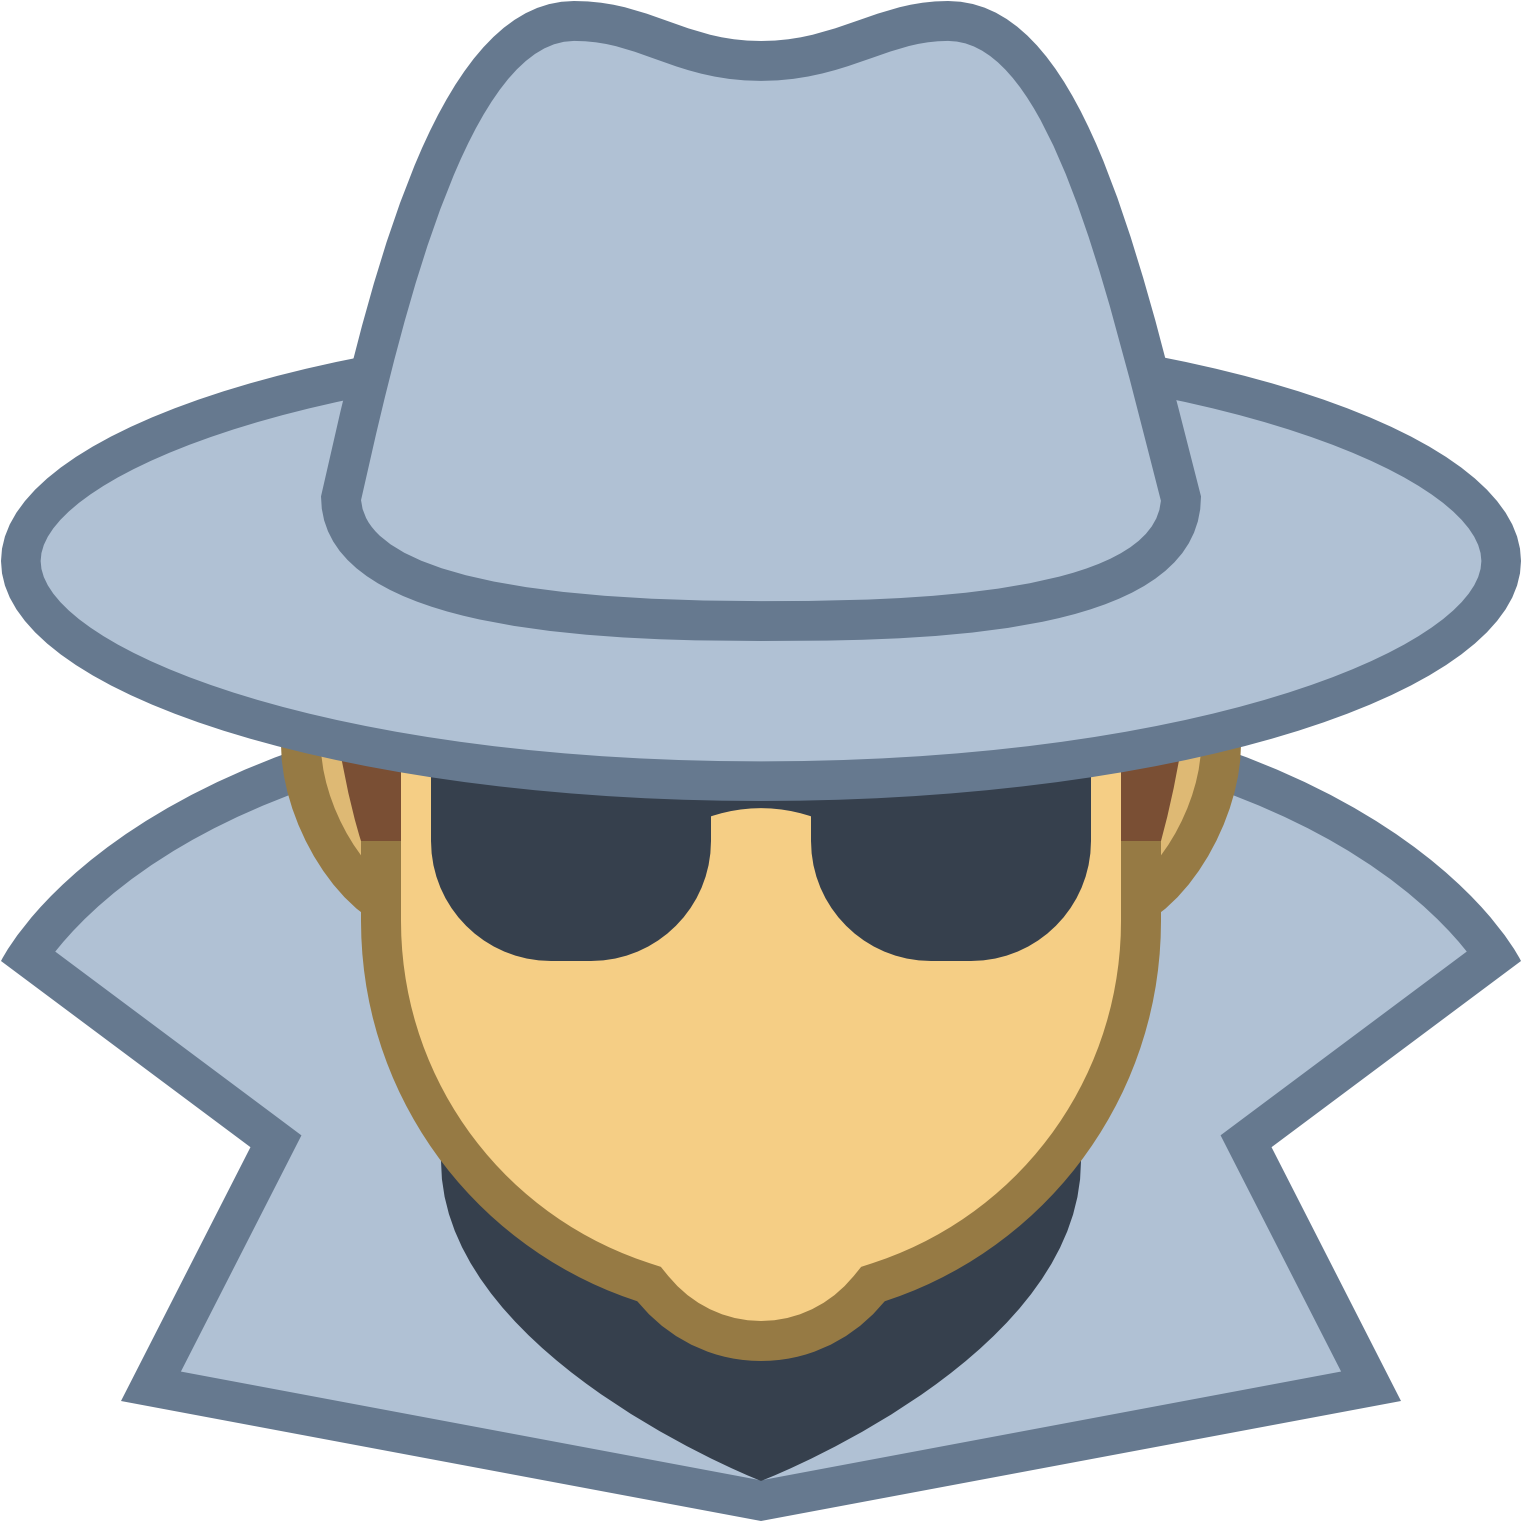 A Cartoon Of A Man Wearing A Hat And Sunglasses